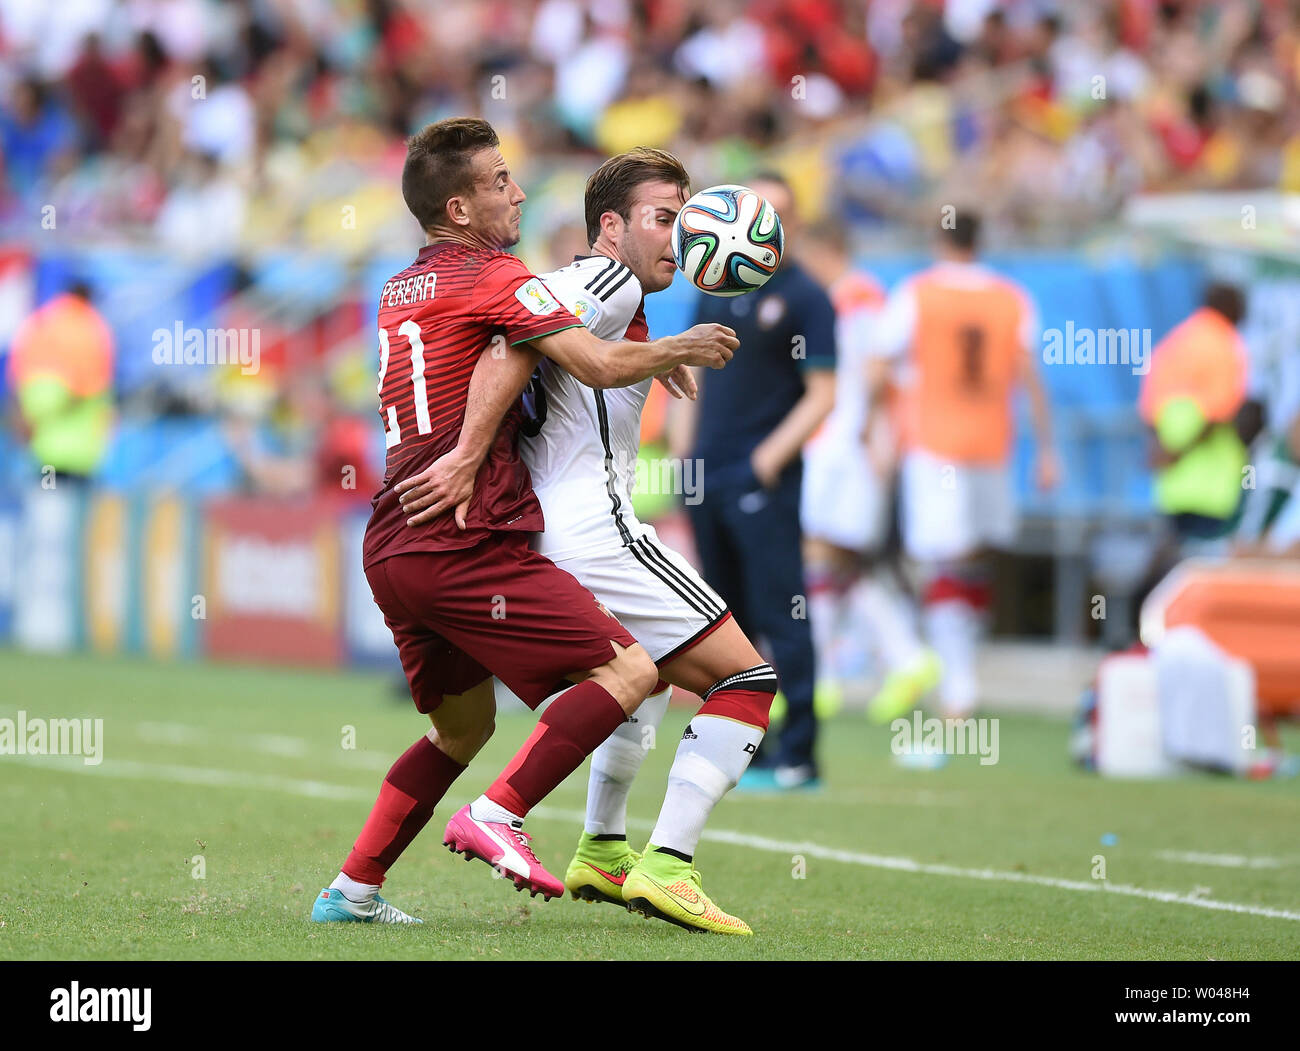 Mario Gotze of Germany competes with Joao Pereira (L) of Portugal during the 2014 FIFA World Cup Group G match at the Arena Fonte Nova in Salvador, Brazil on June 16, 2014. UPI/Chris Brunskill Stock Photo